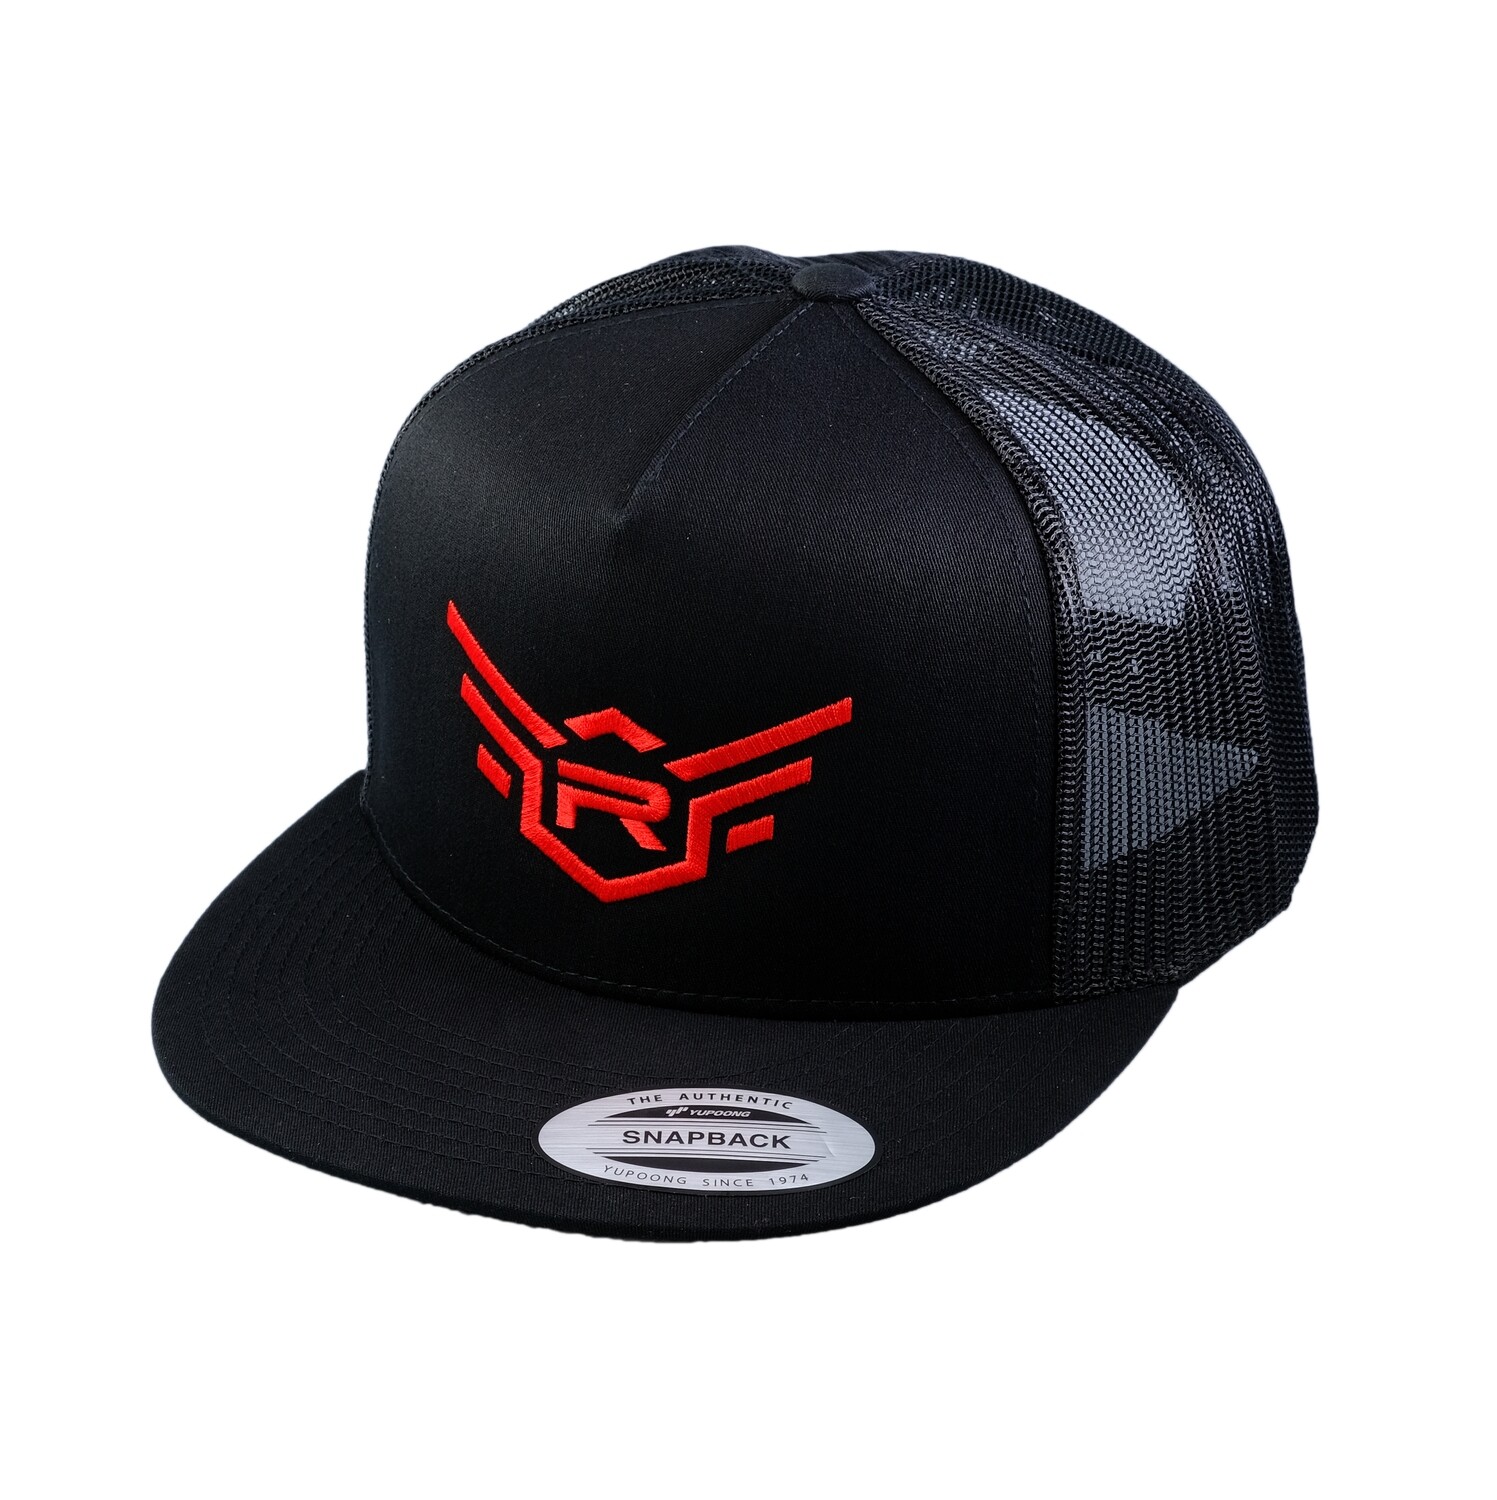 HAT SNAPBACK "7th COLLECTION" BLACK/RED